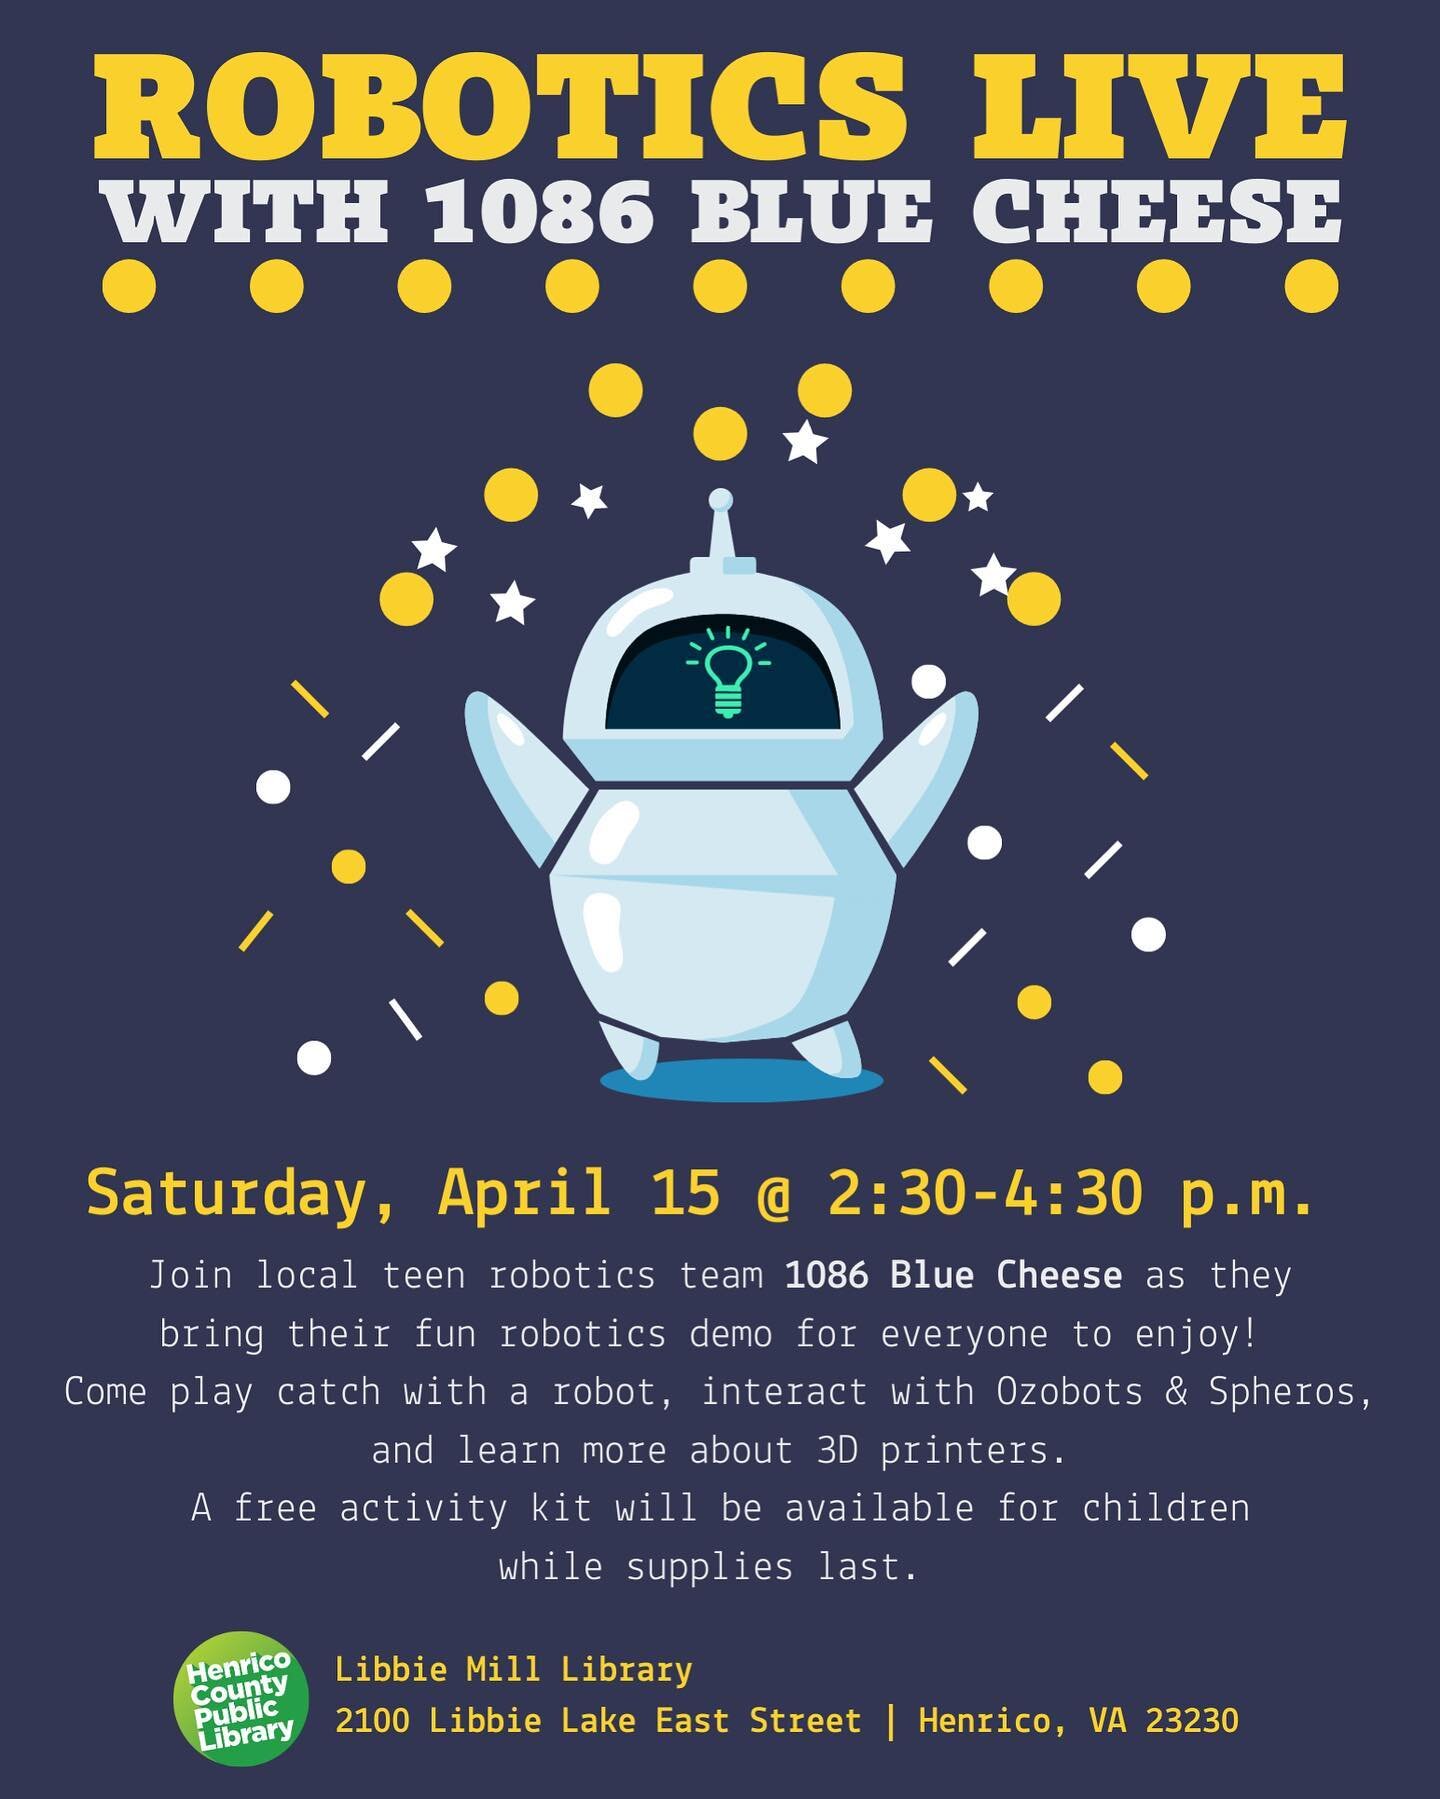 Come play catch with us with a robot, interact with Ozobots &amp; Spheros and learn about 3D printers this Saturday @libbiemilllibrary! See you there!
#STEM #omgrobots #firstchesapeake #whatsthatsmell&hellip;bluecheese!